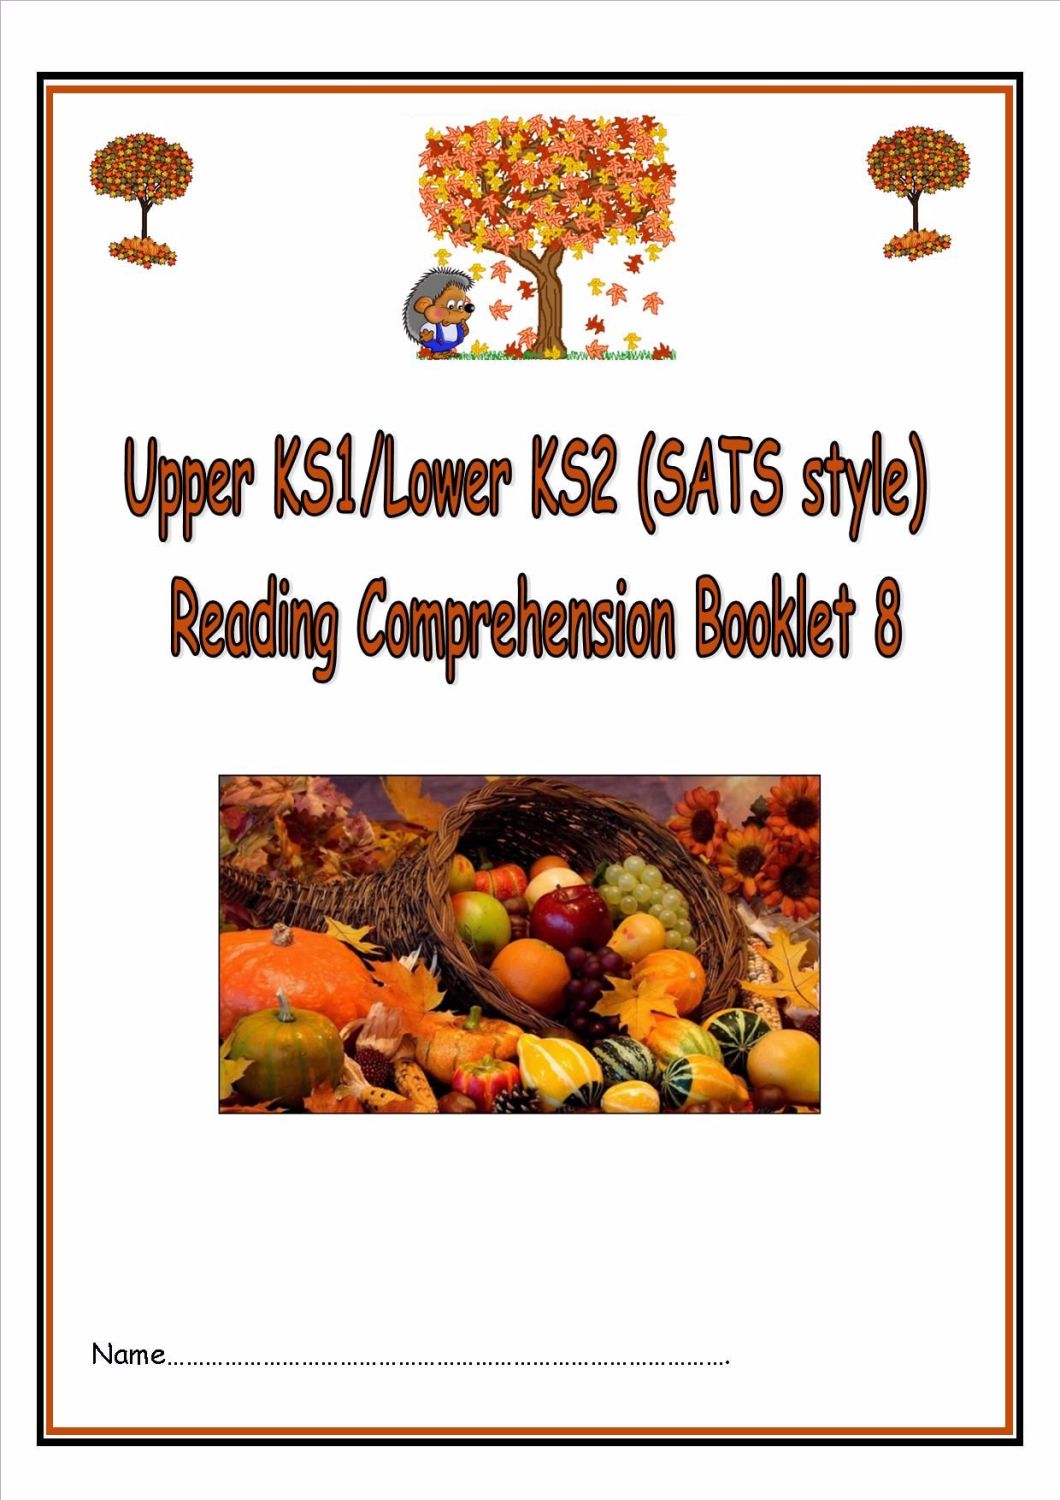 KS1/LKS2 SATs style (autumn themed) reading comprehension booklet (8).